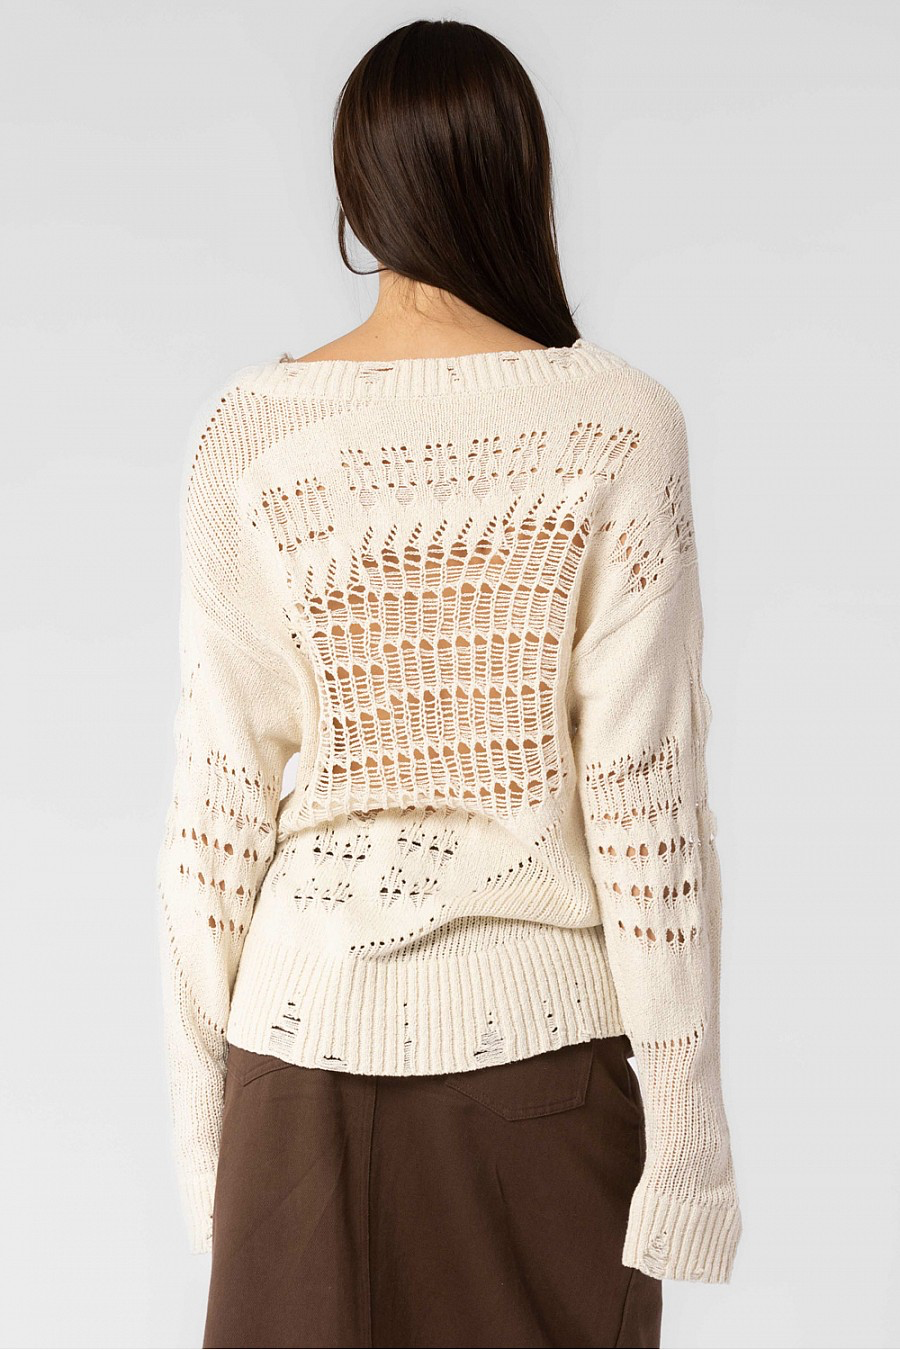 Destroyed knit sweater.